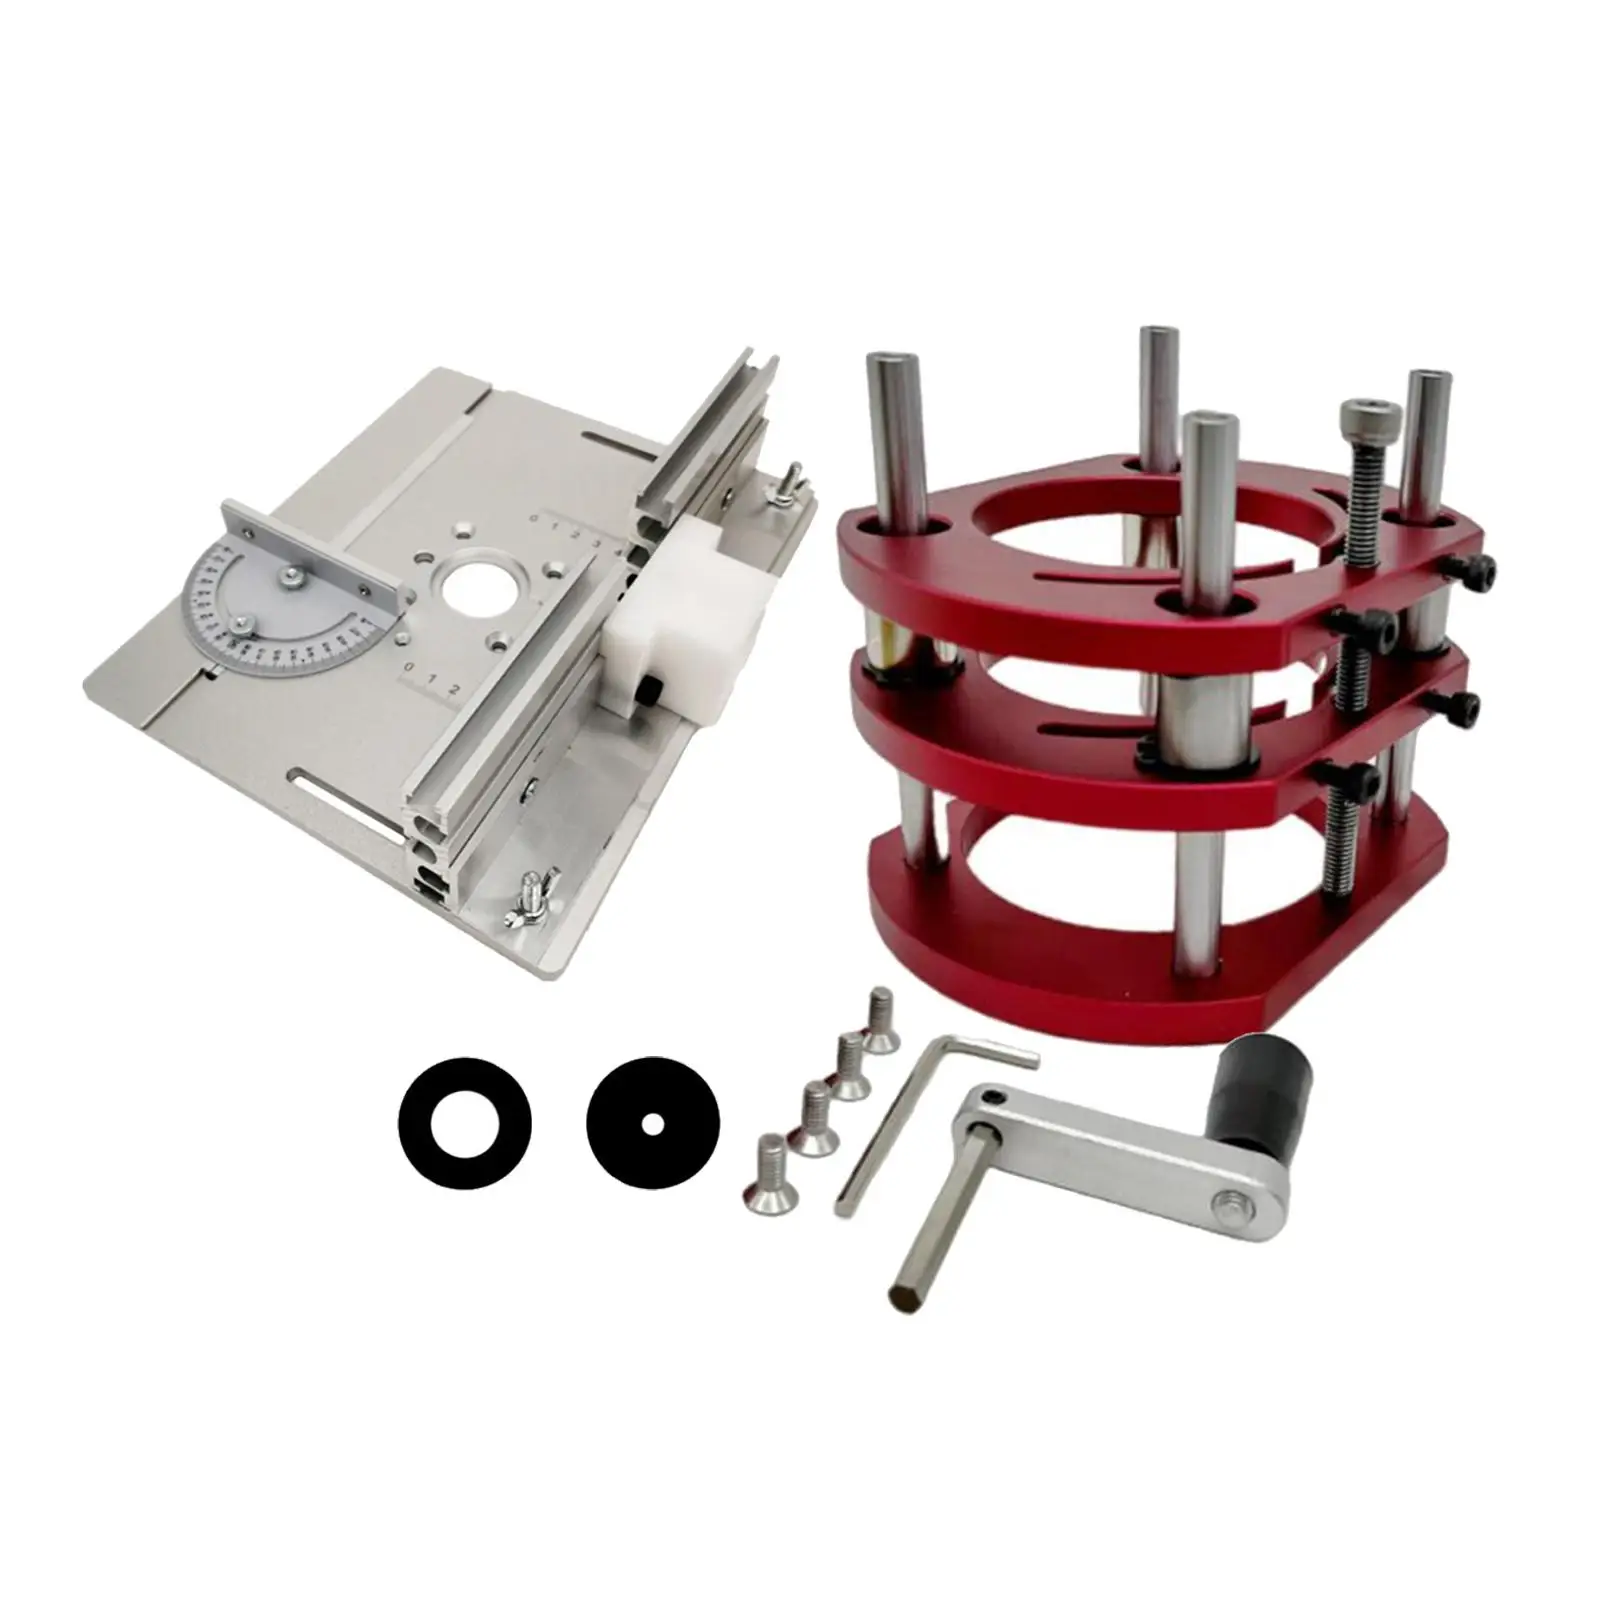 Woodworking Lifting Platform Stand with lifting base Router lifting system for 64-66mm Diameter Motors Milling Trimming Novices